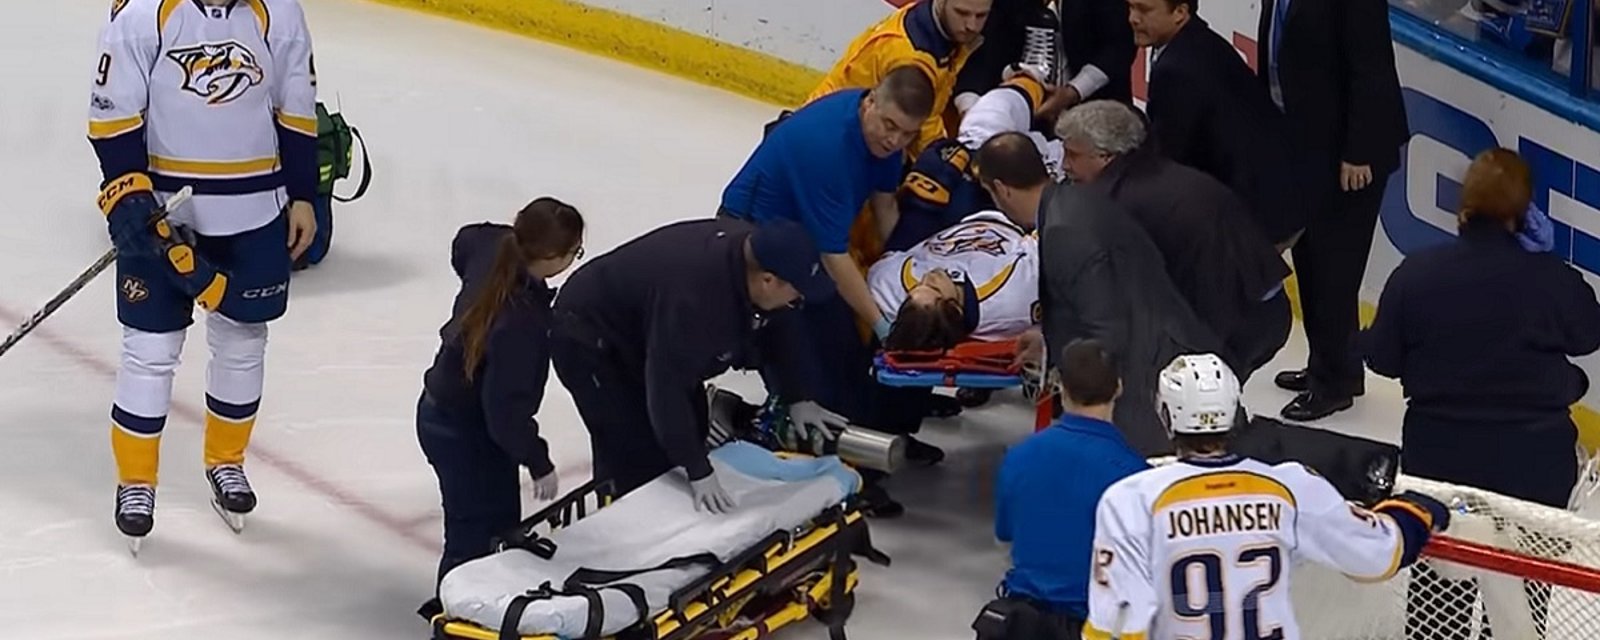 Minor update on Fiala after gruesome injury in Game 1.